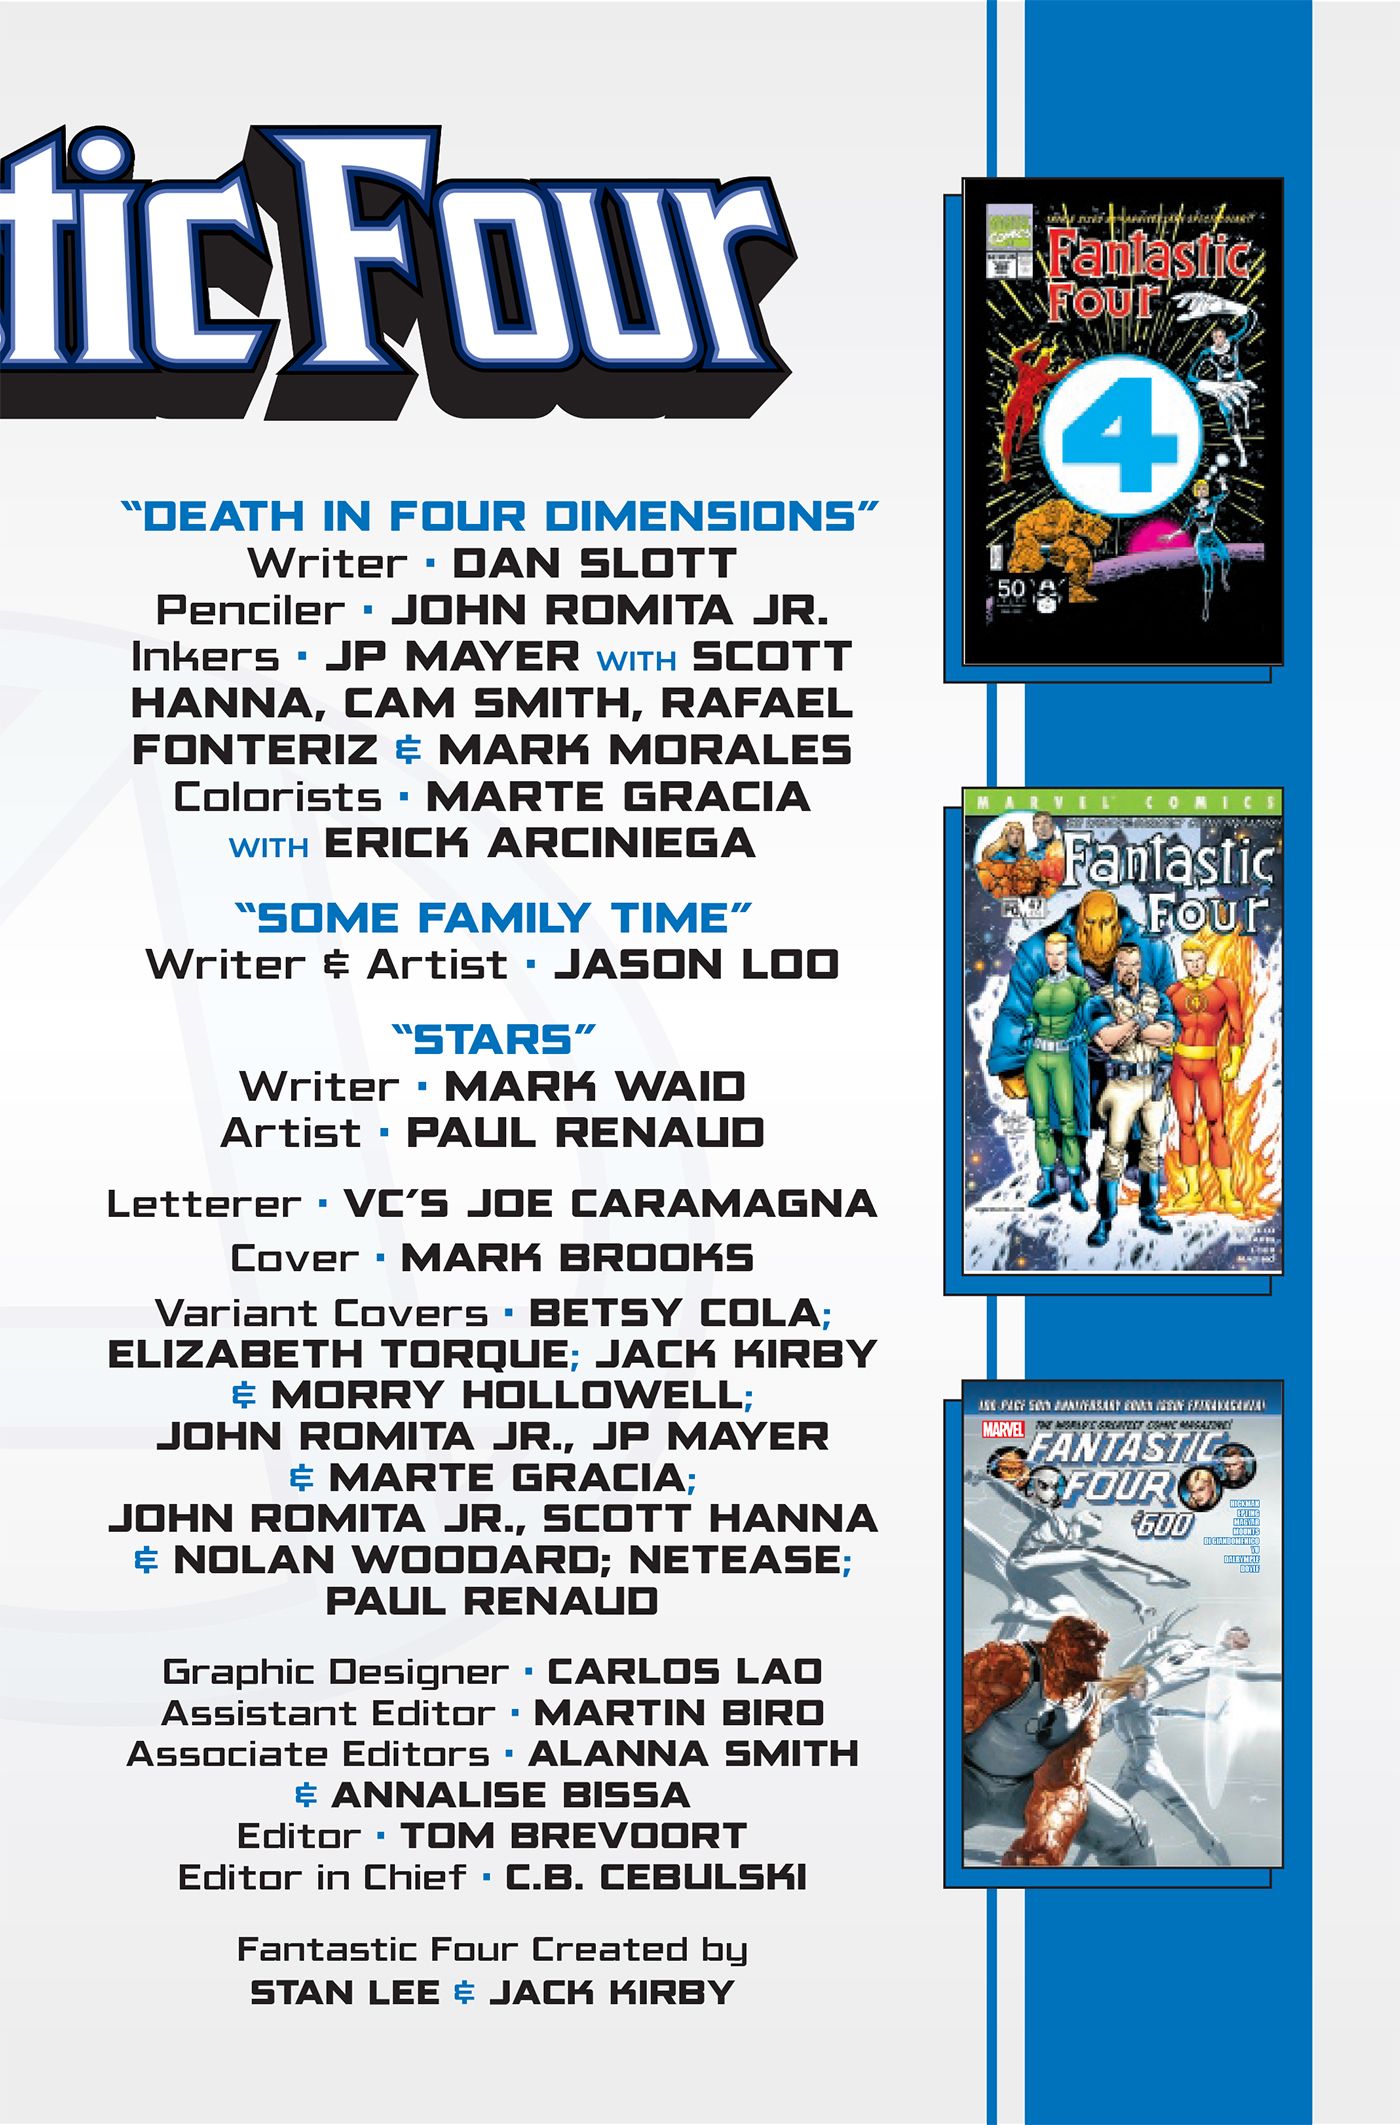 The contributors listed for Fantastic Four #35.